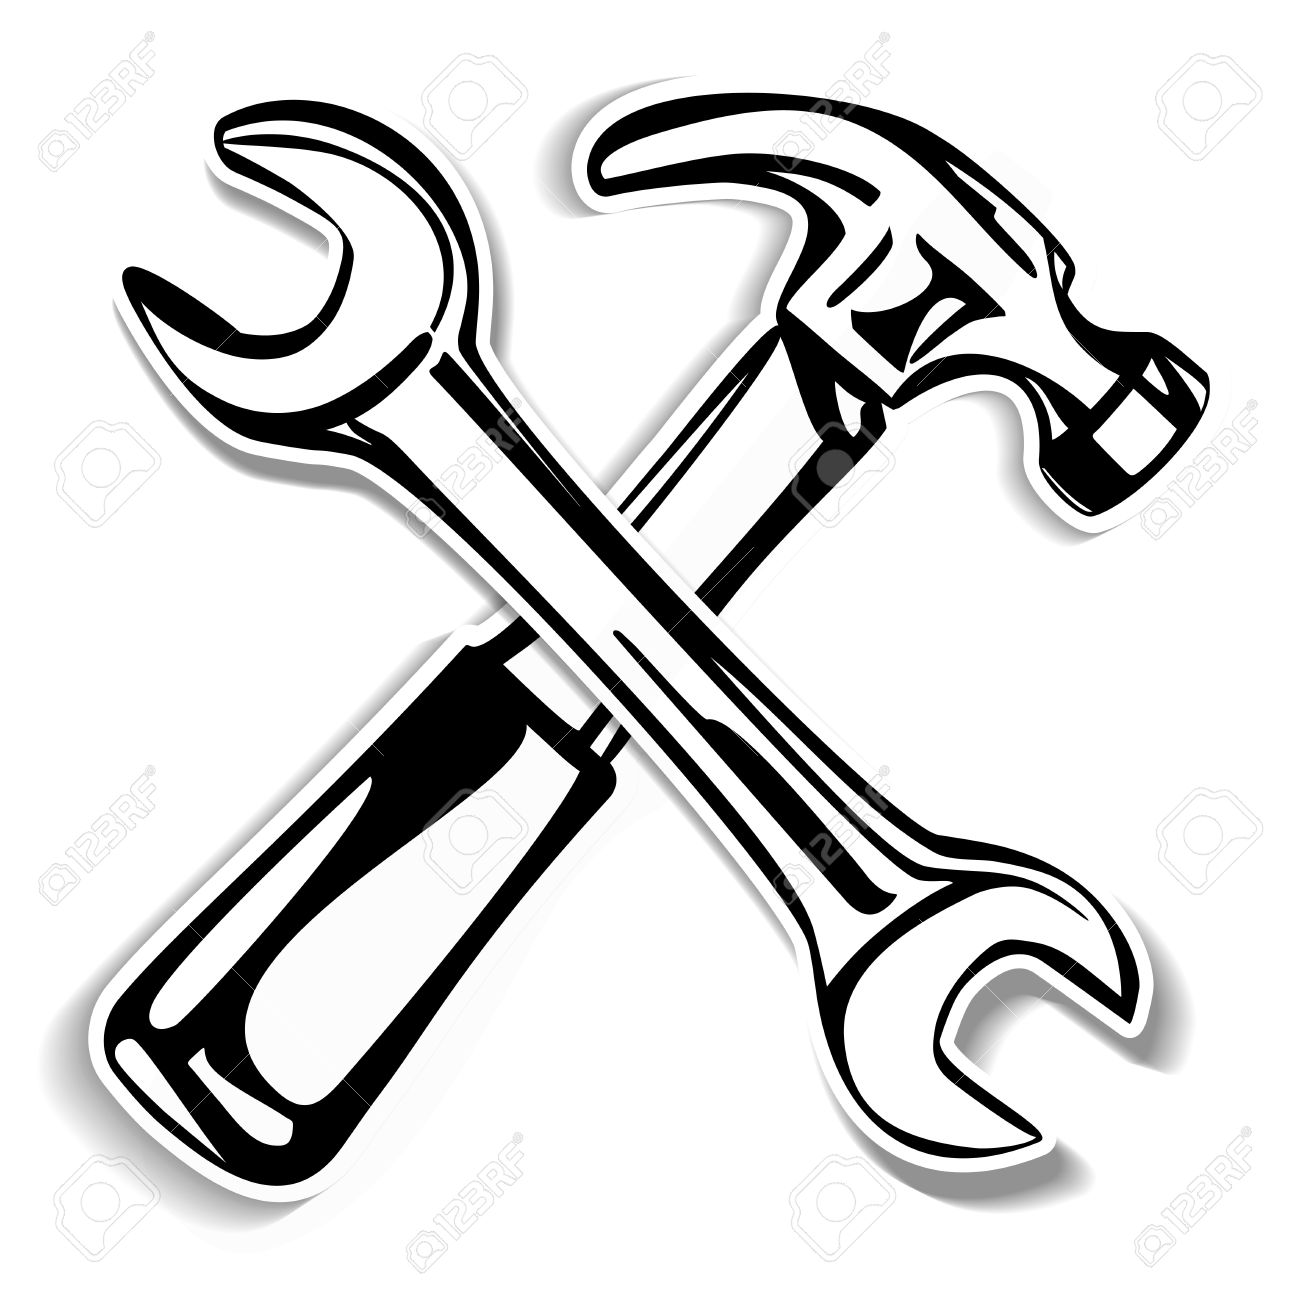 Hammer Clipart Black And White | Free download on ClipArtMag